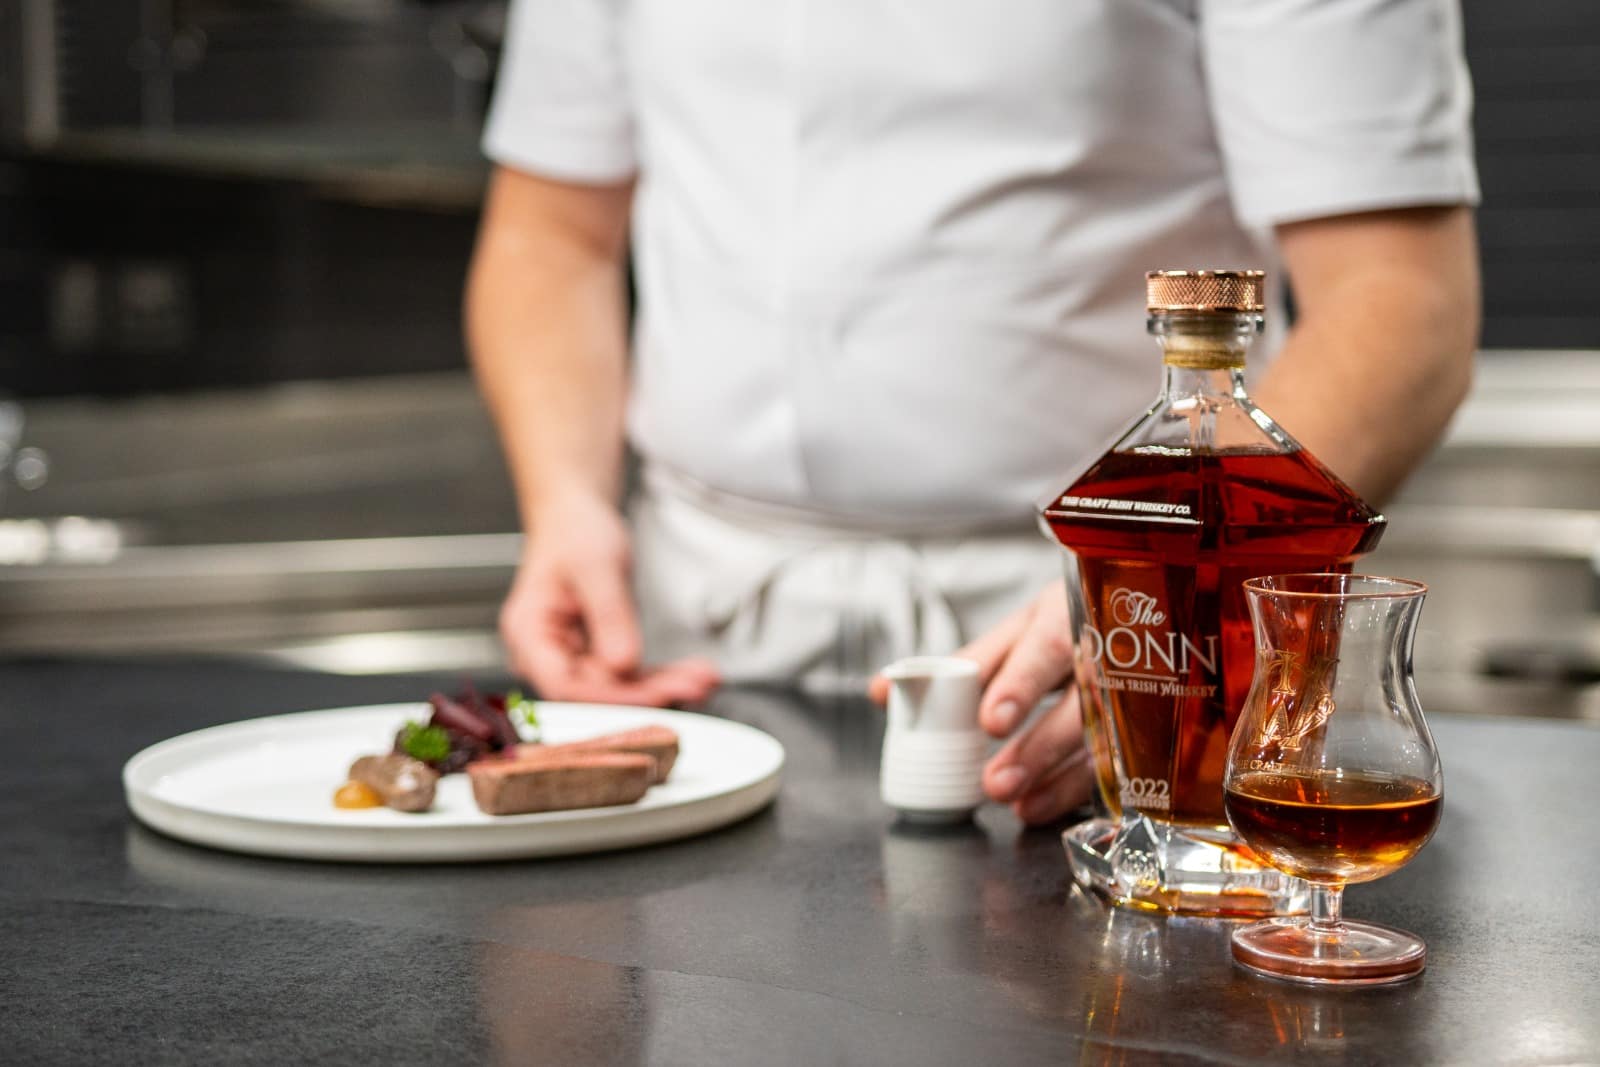 bottle of the Donn, luxury Irish whiskey, and a chef preparing a meal